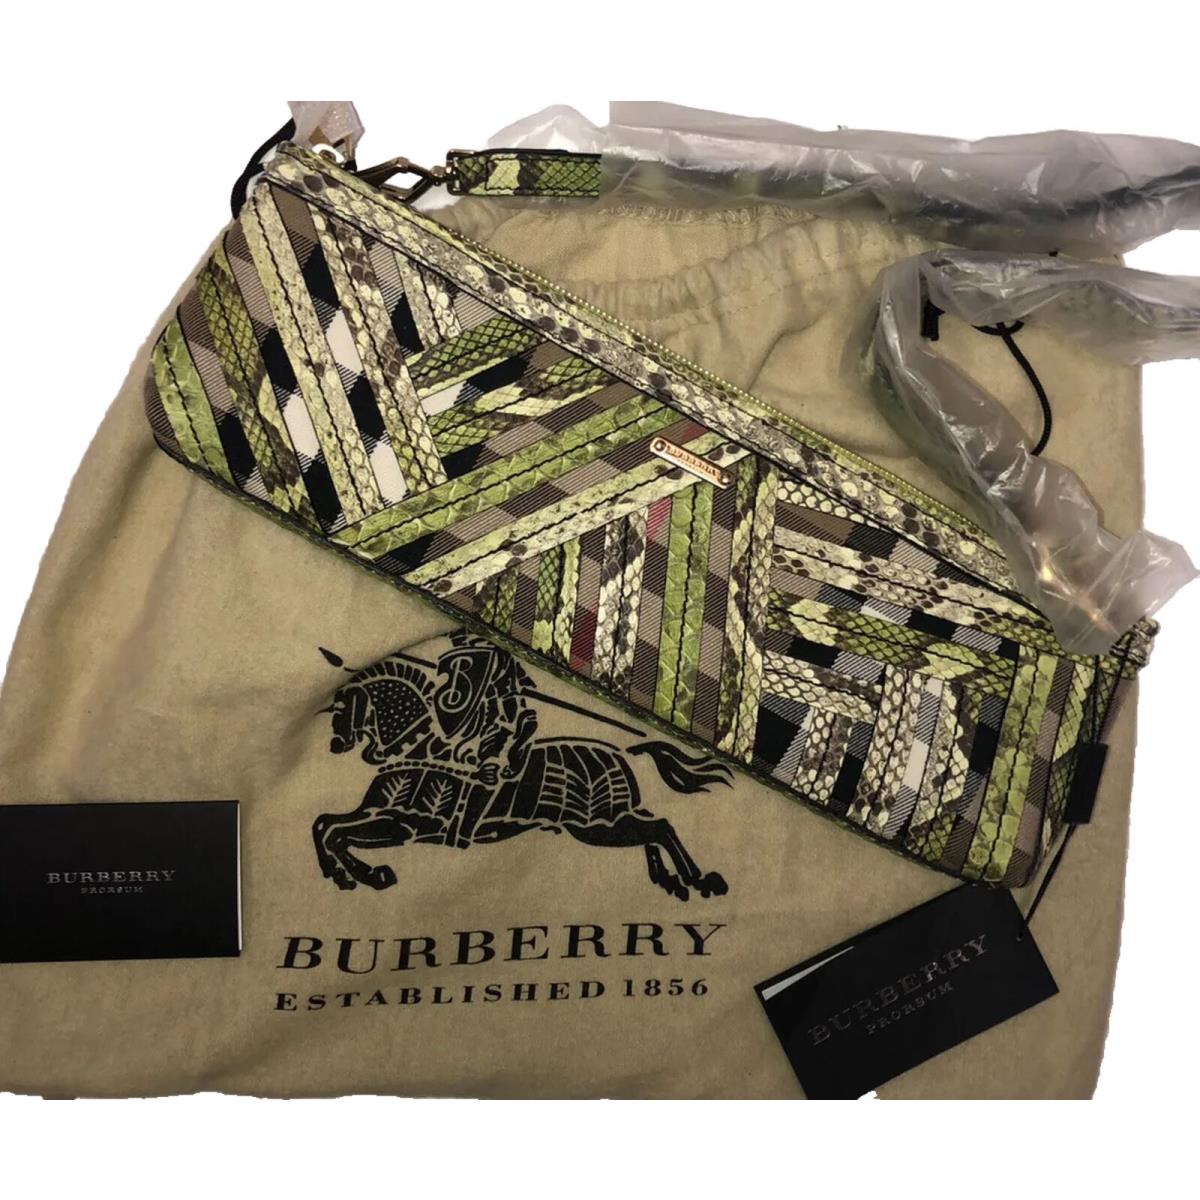 Burberry Prorsum Parmoor Shoulder Bag Clutch House Check Lime Snake Leather